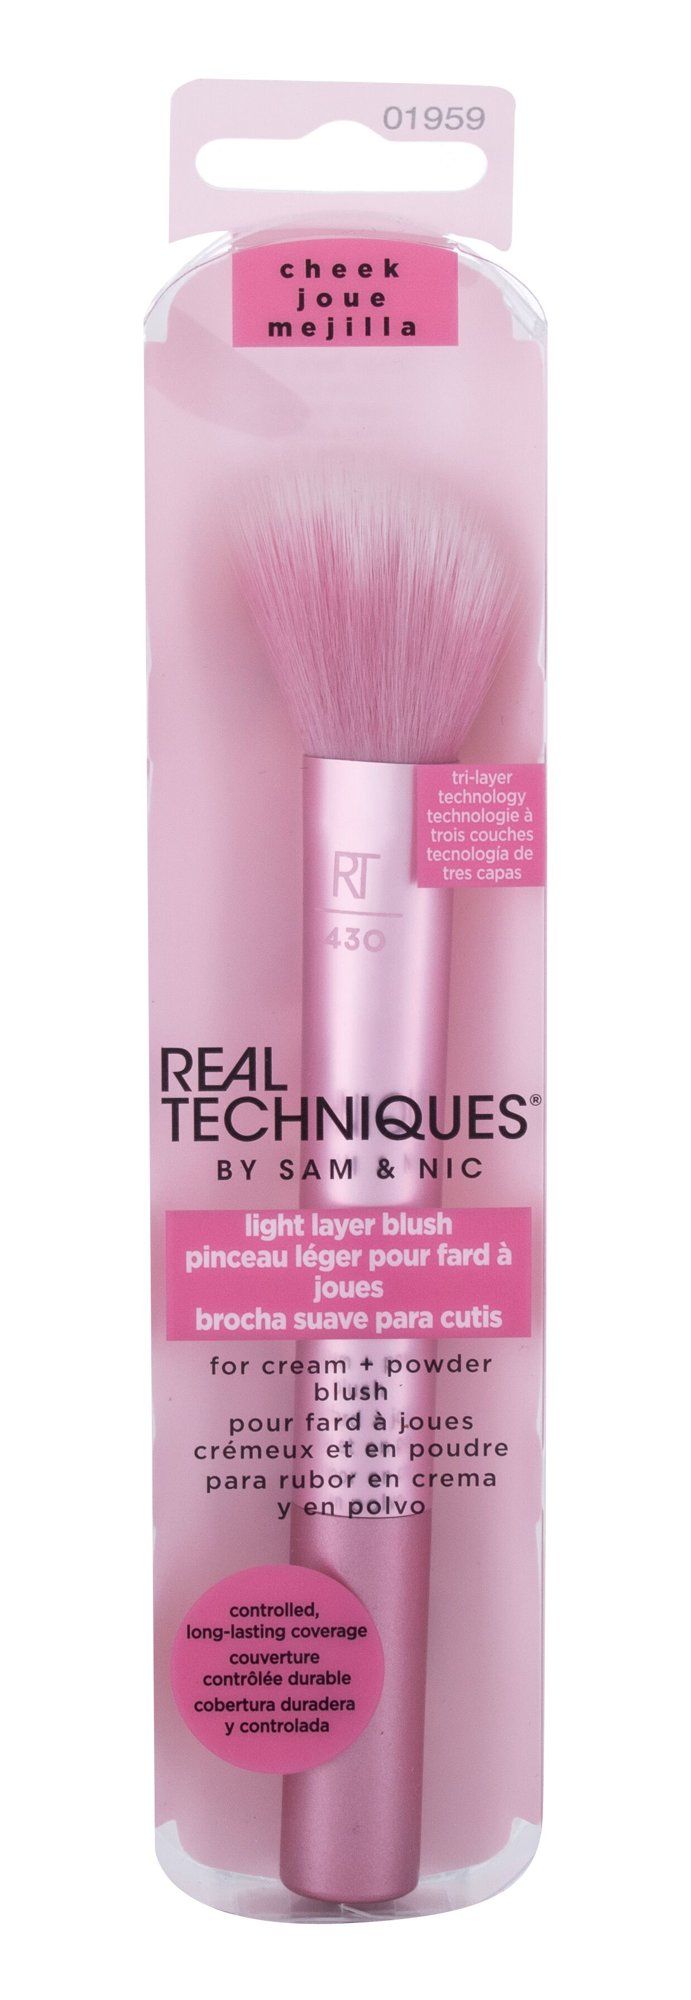 Real Techniques Brushes Light Layer Blush teptukas